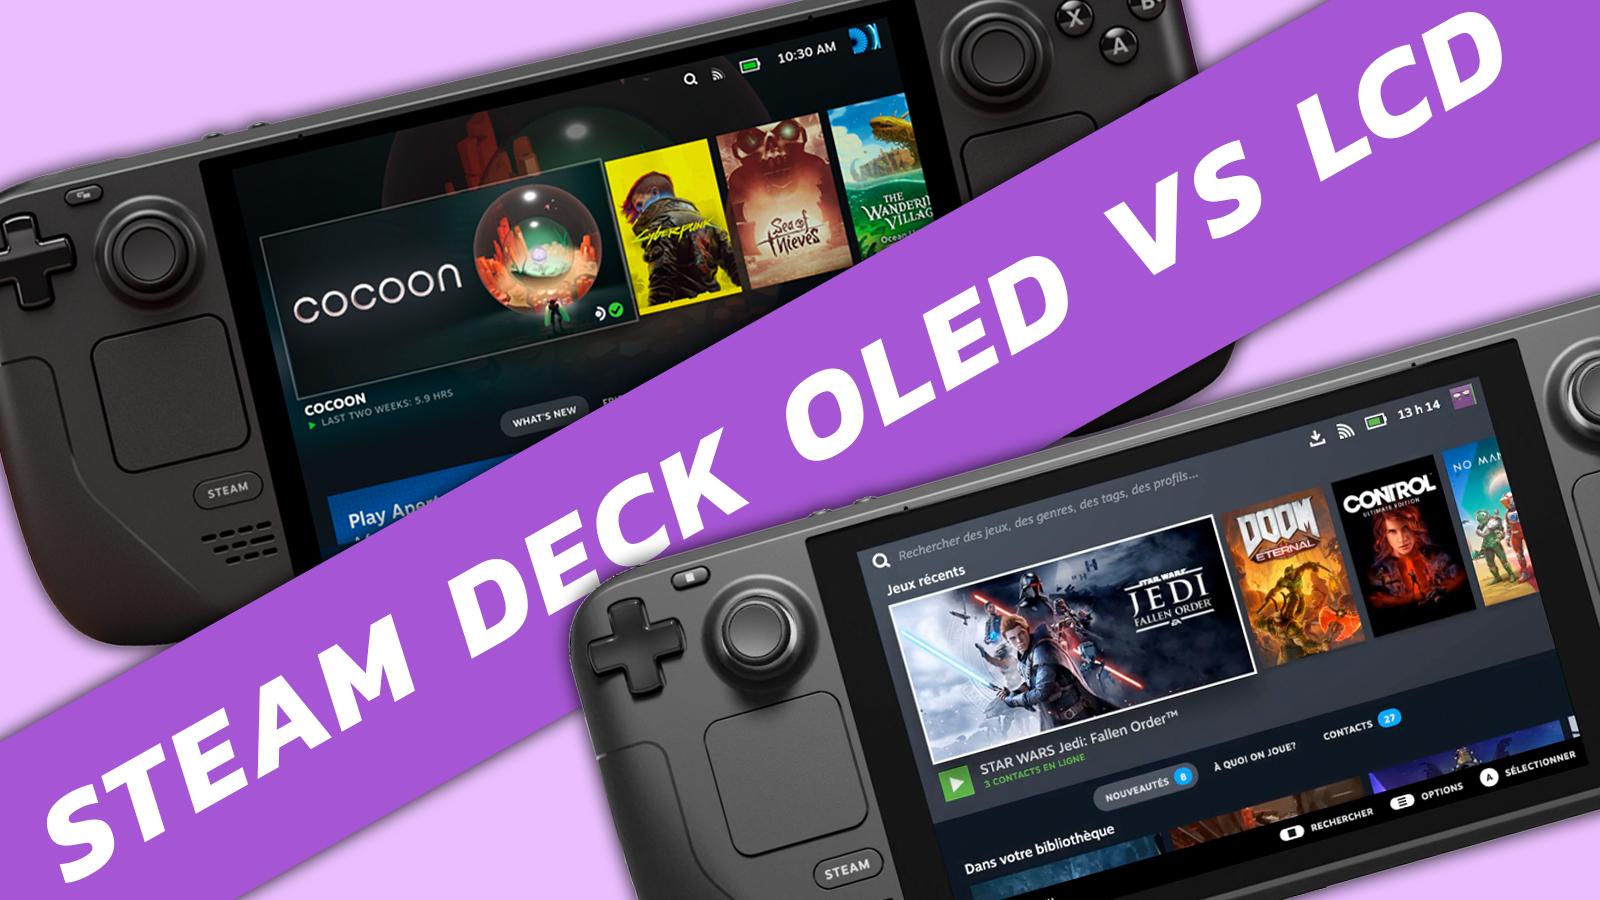 Steam Deck OLED review: It's just better